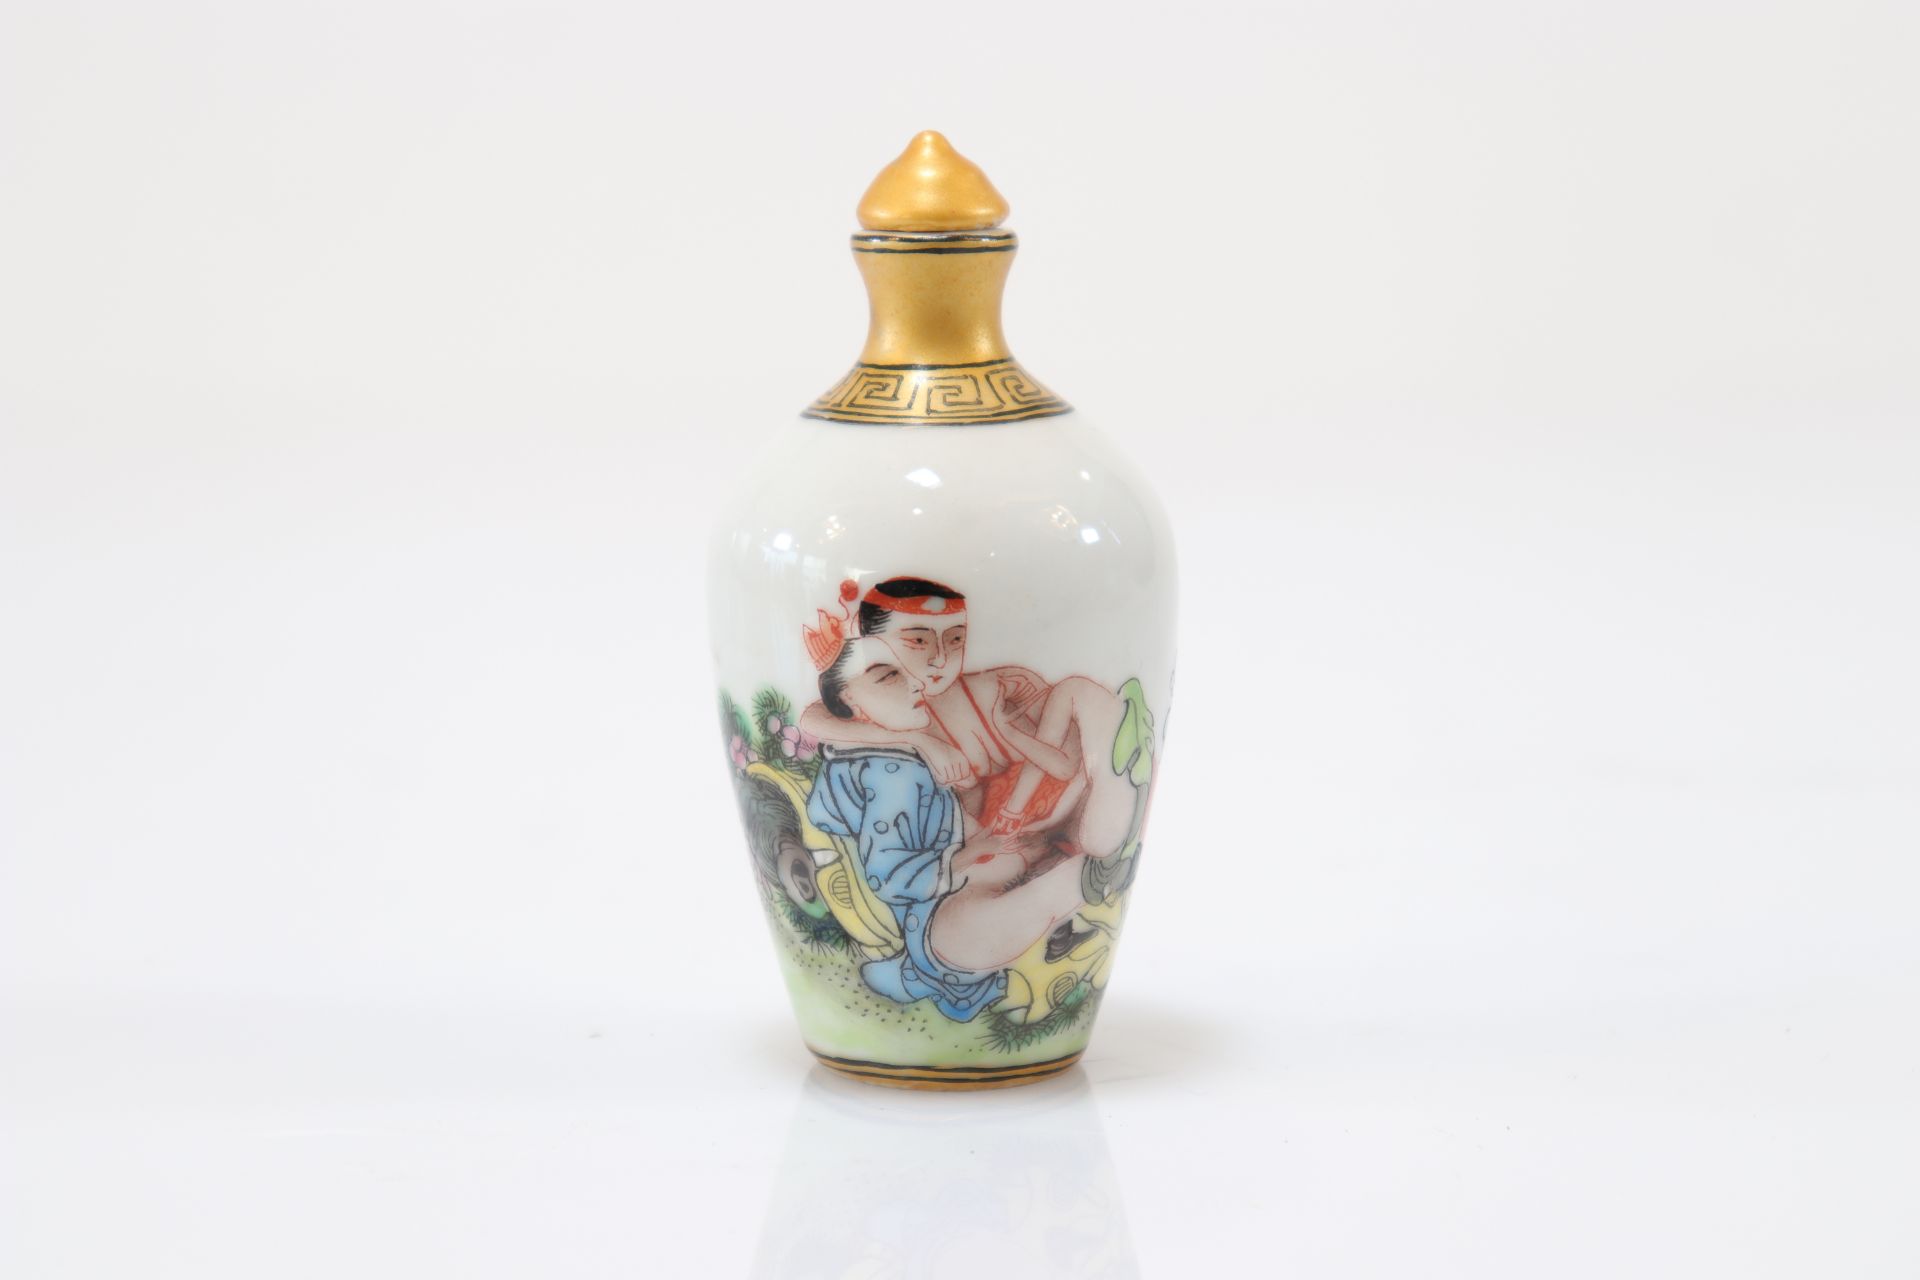 Chinese porcelain snuffbox with erotic decor